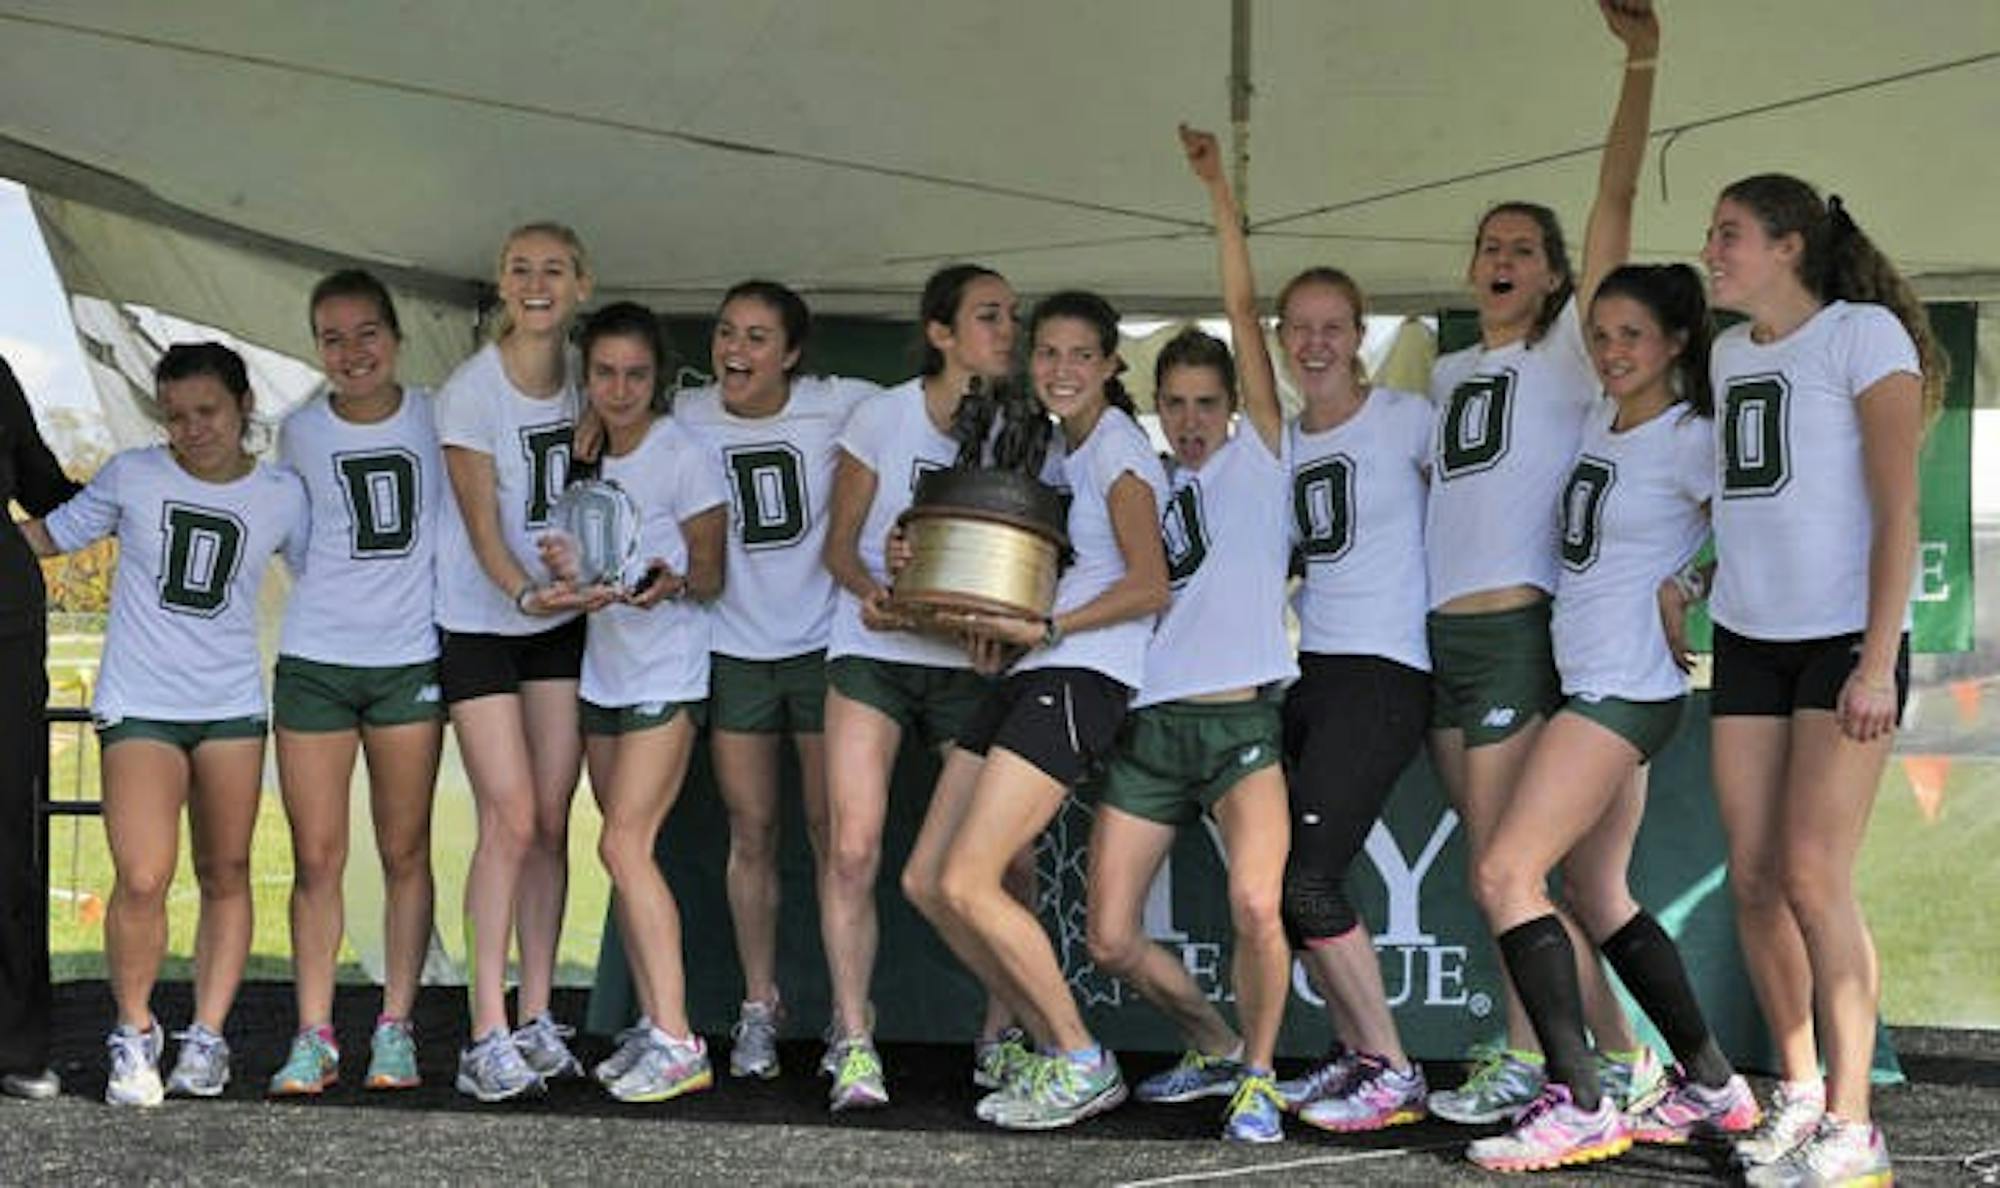 The women’s cross country team rode a first-place finish by Abbey D’Agostino ’14 to an Ivy title over the weekend.